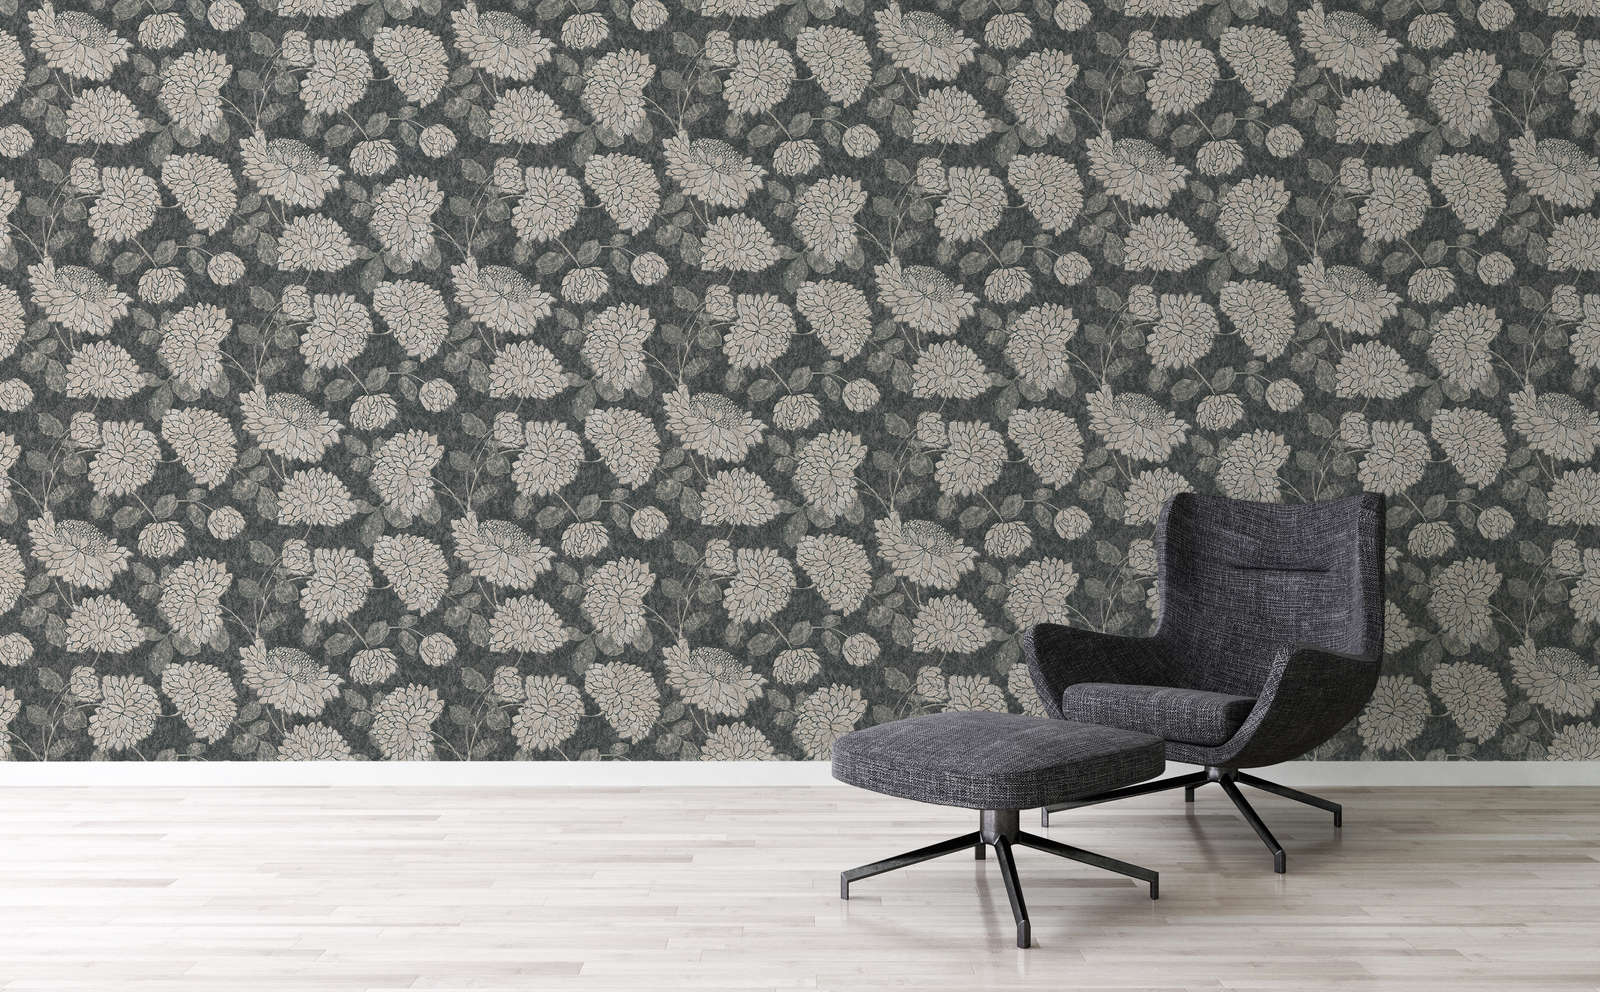             Pattern wallpaper with flowers with a slight sheen - black, white, silver
        